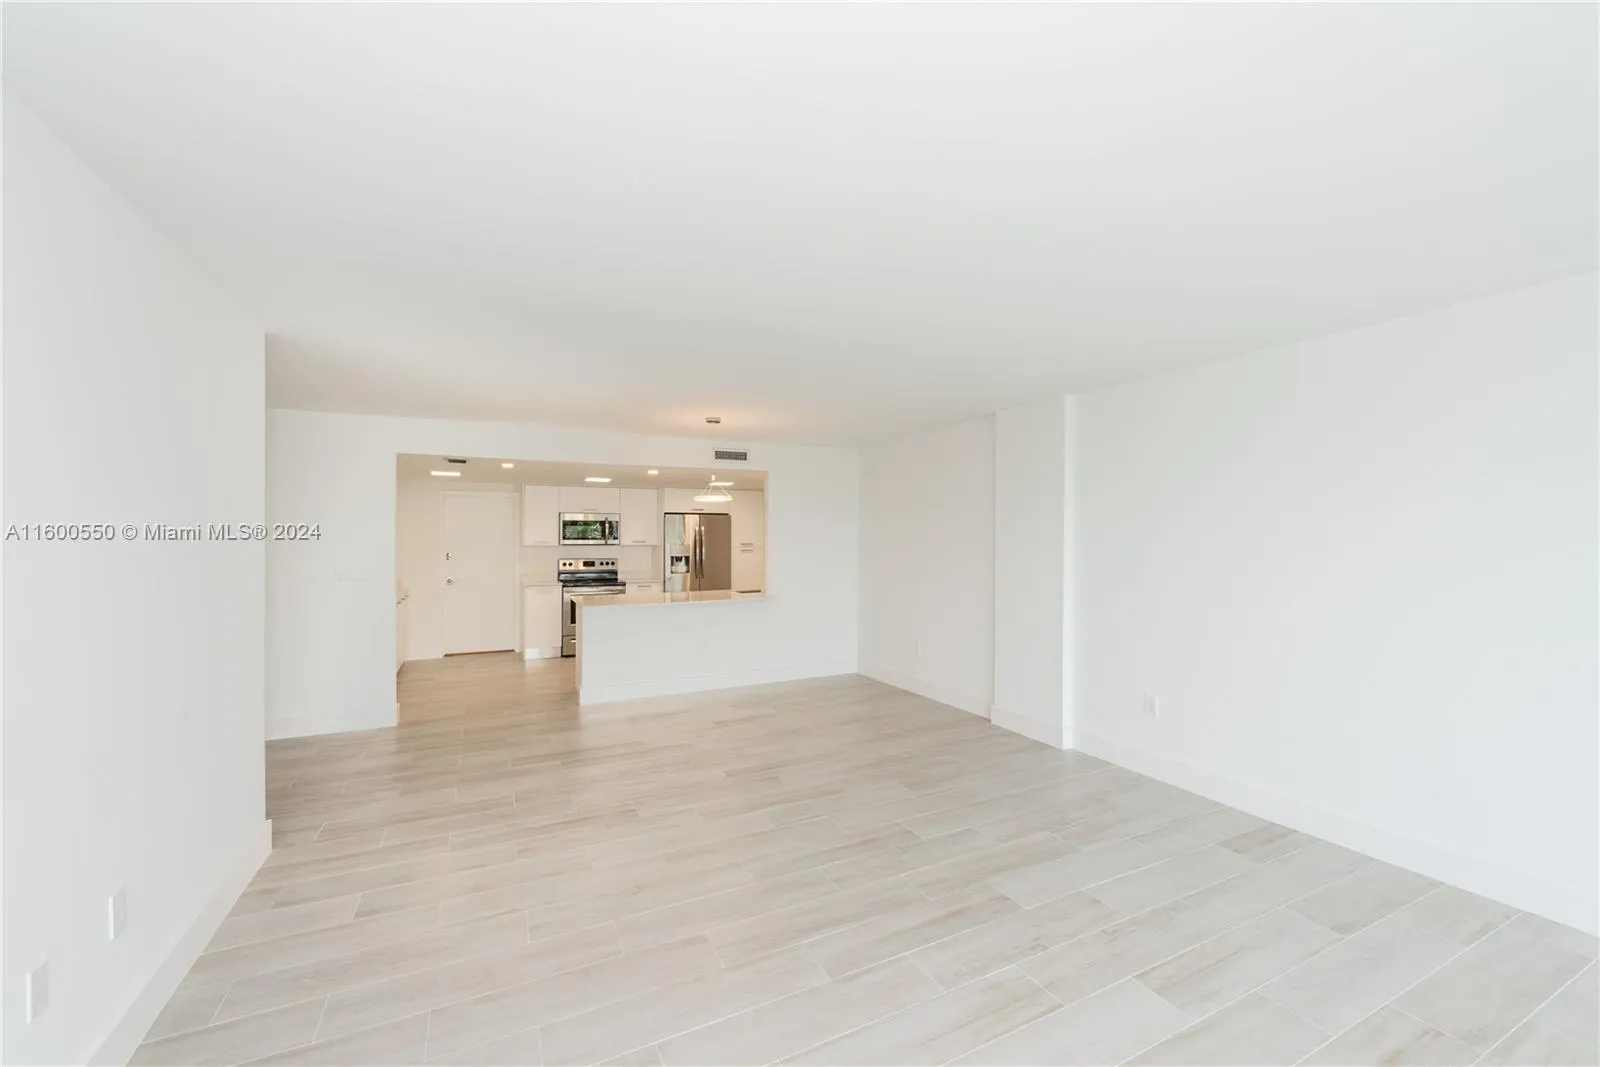 FULLY RENOVATED CONDO WITH OPEN VIEWS TO THE PARK.